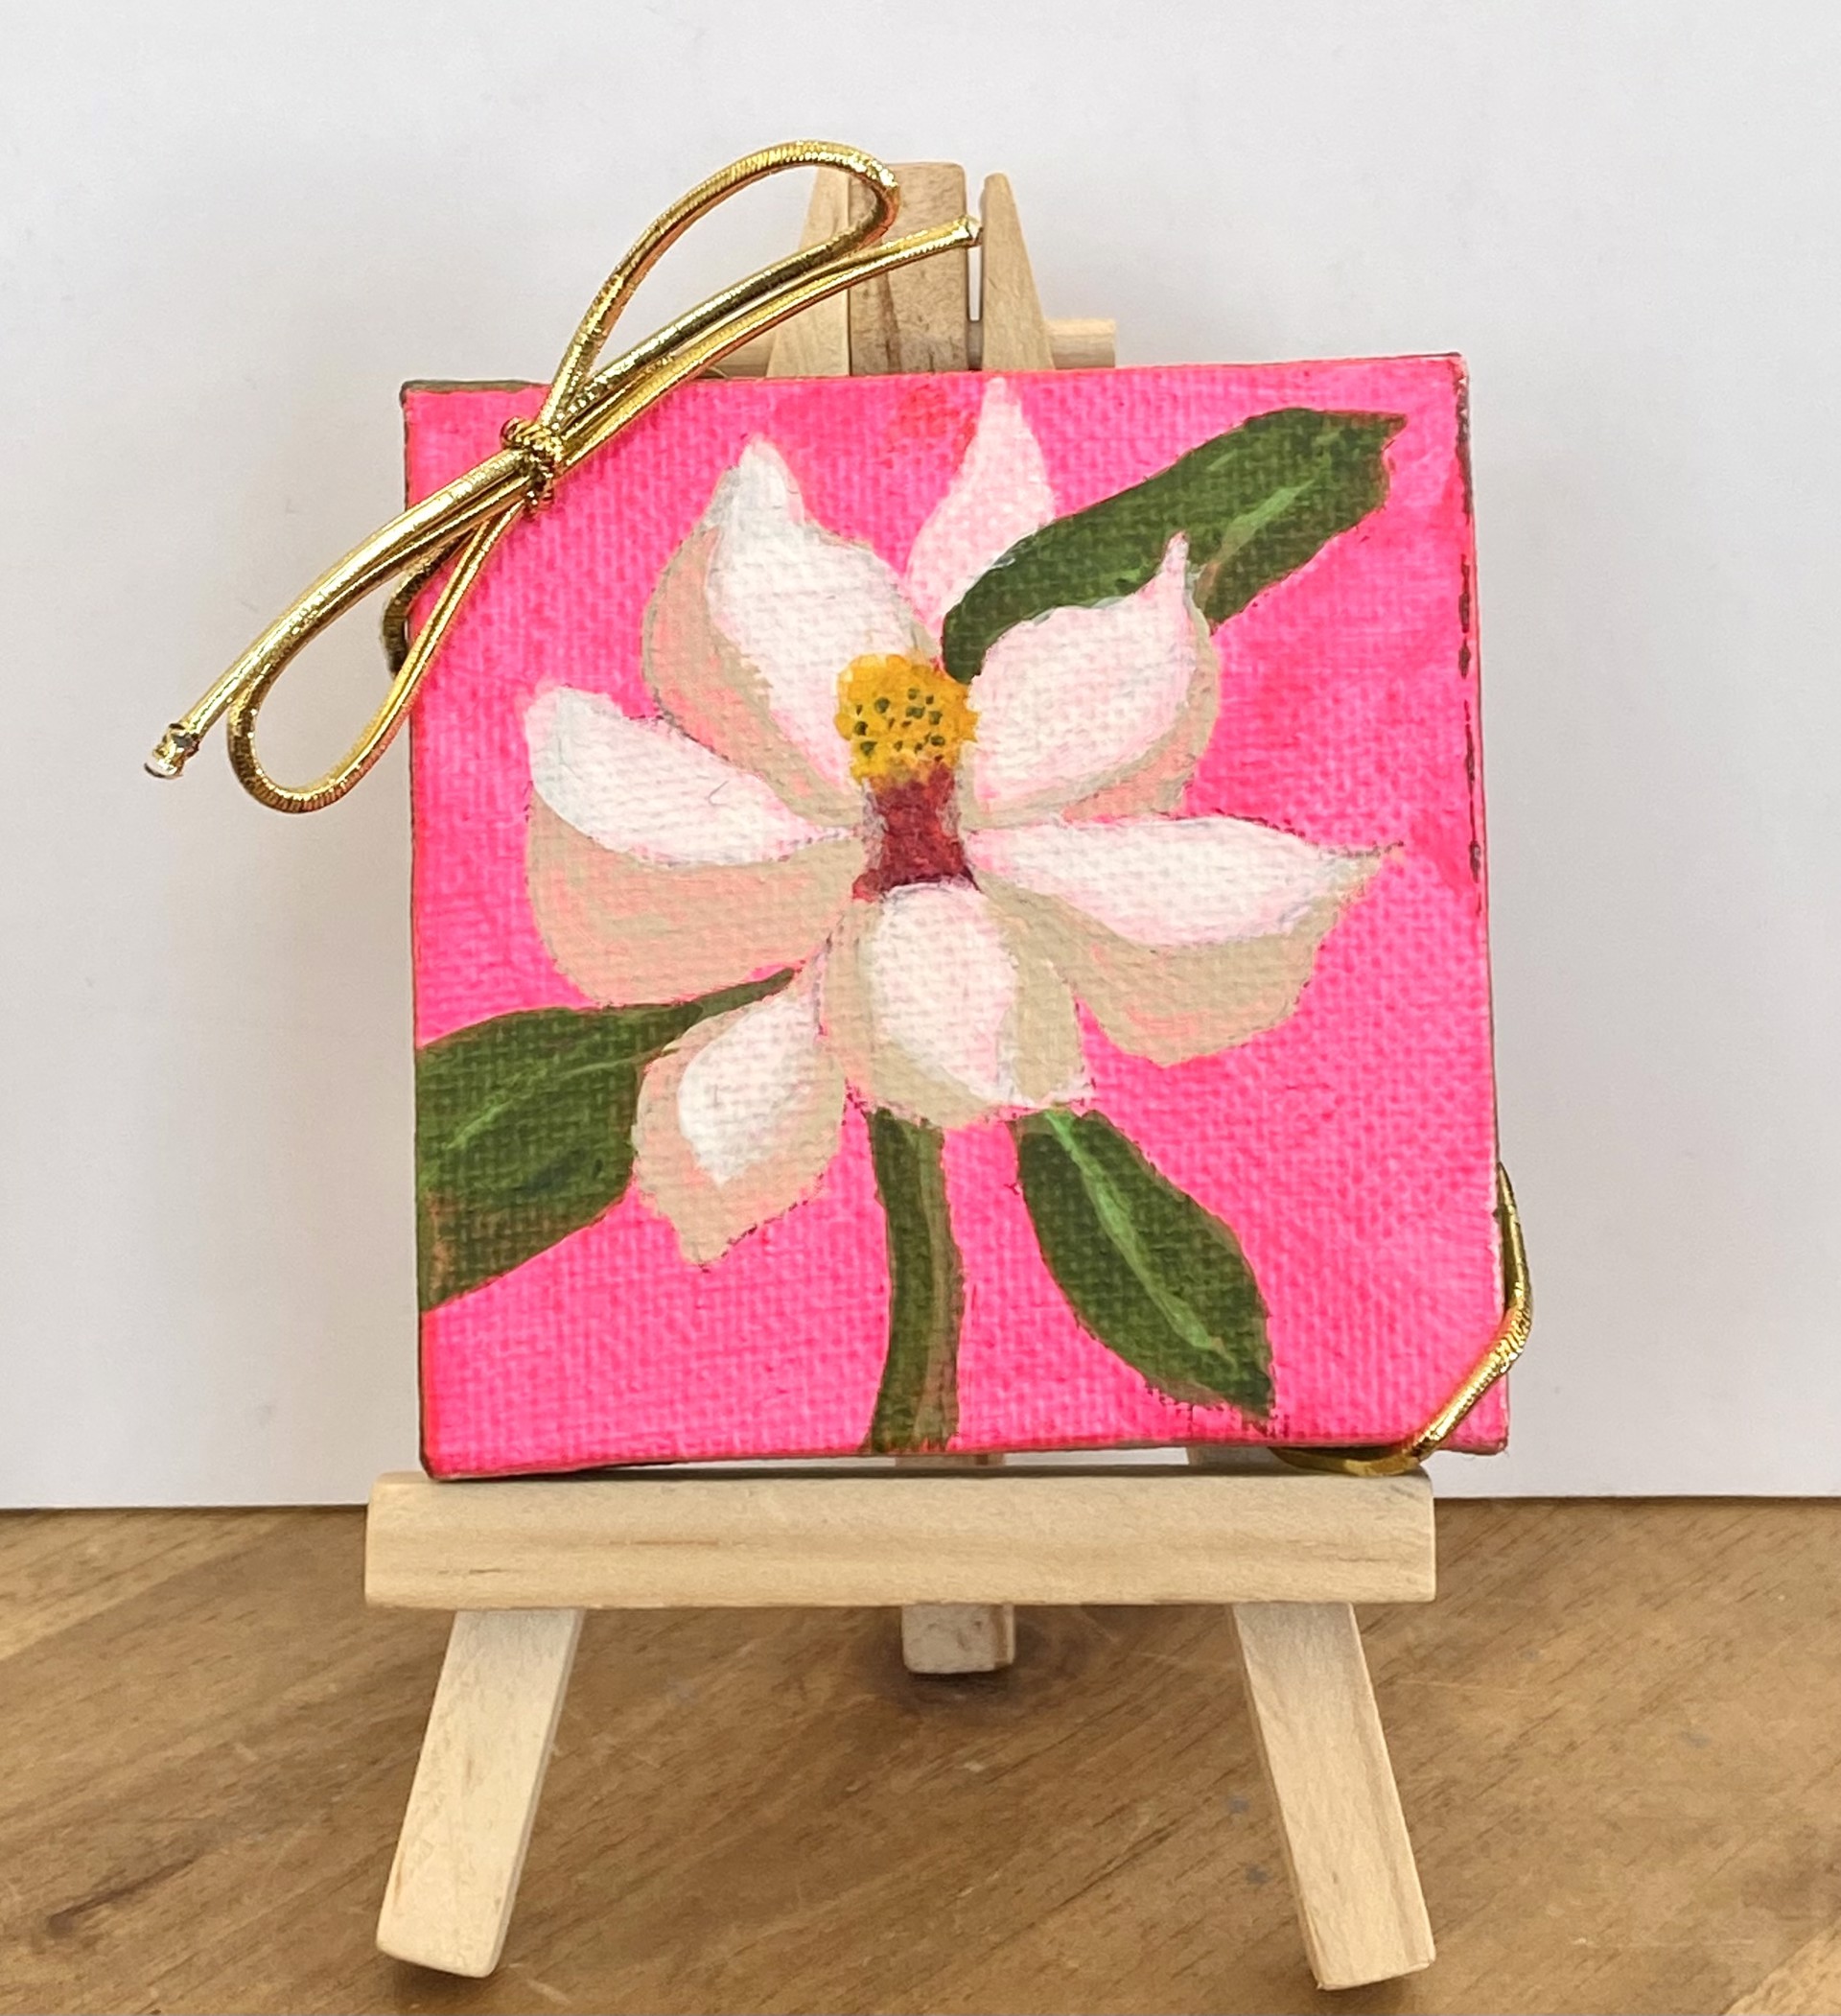 Pink Magnolia Mini Painting #3 by Elke Briuer